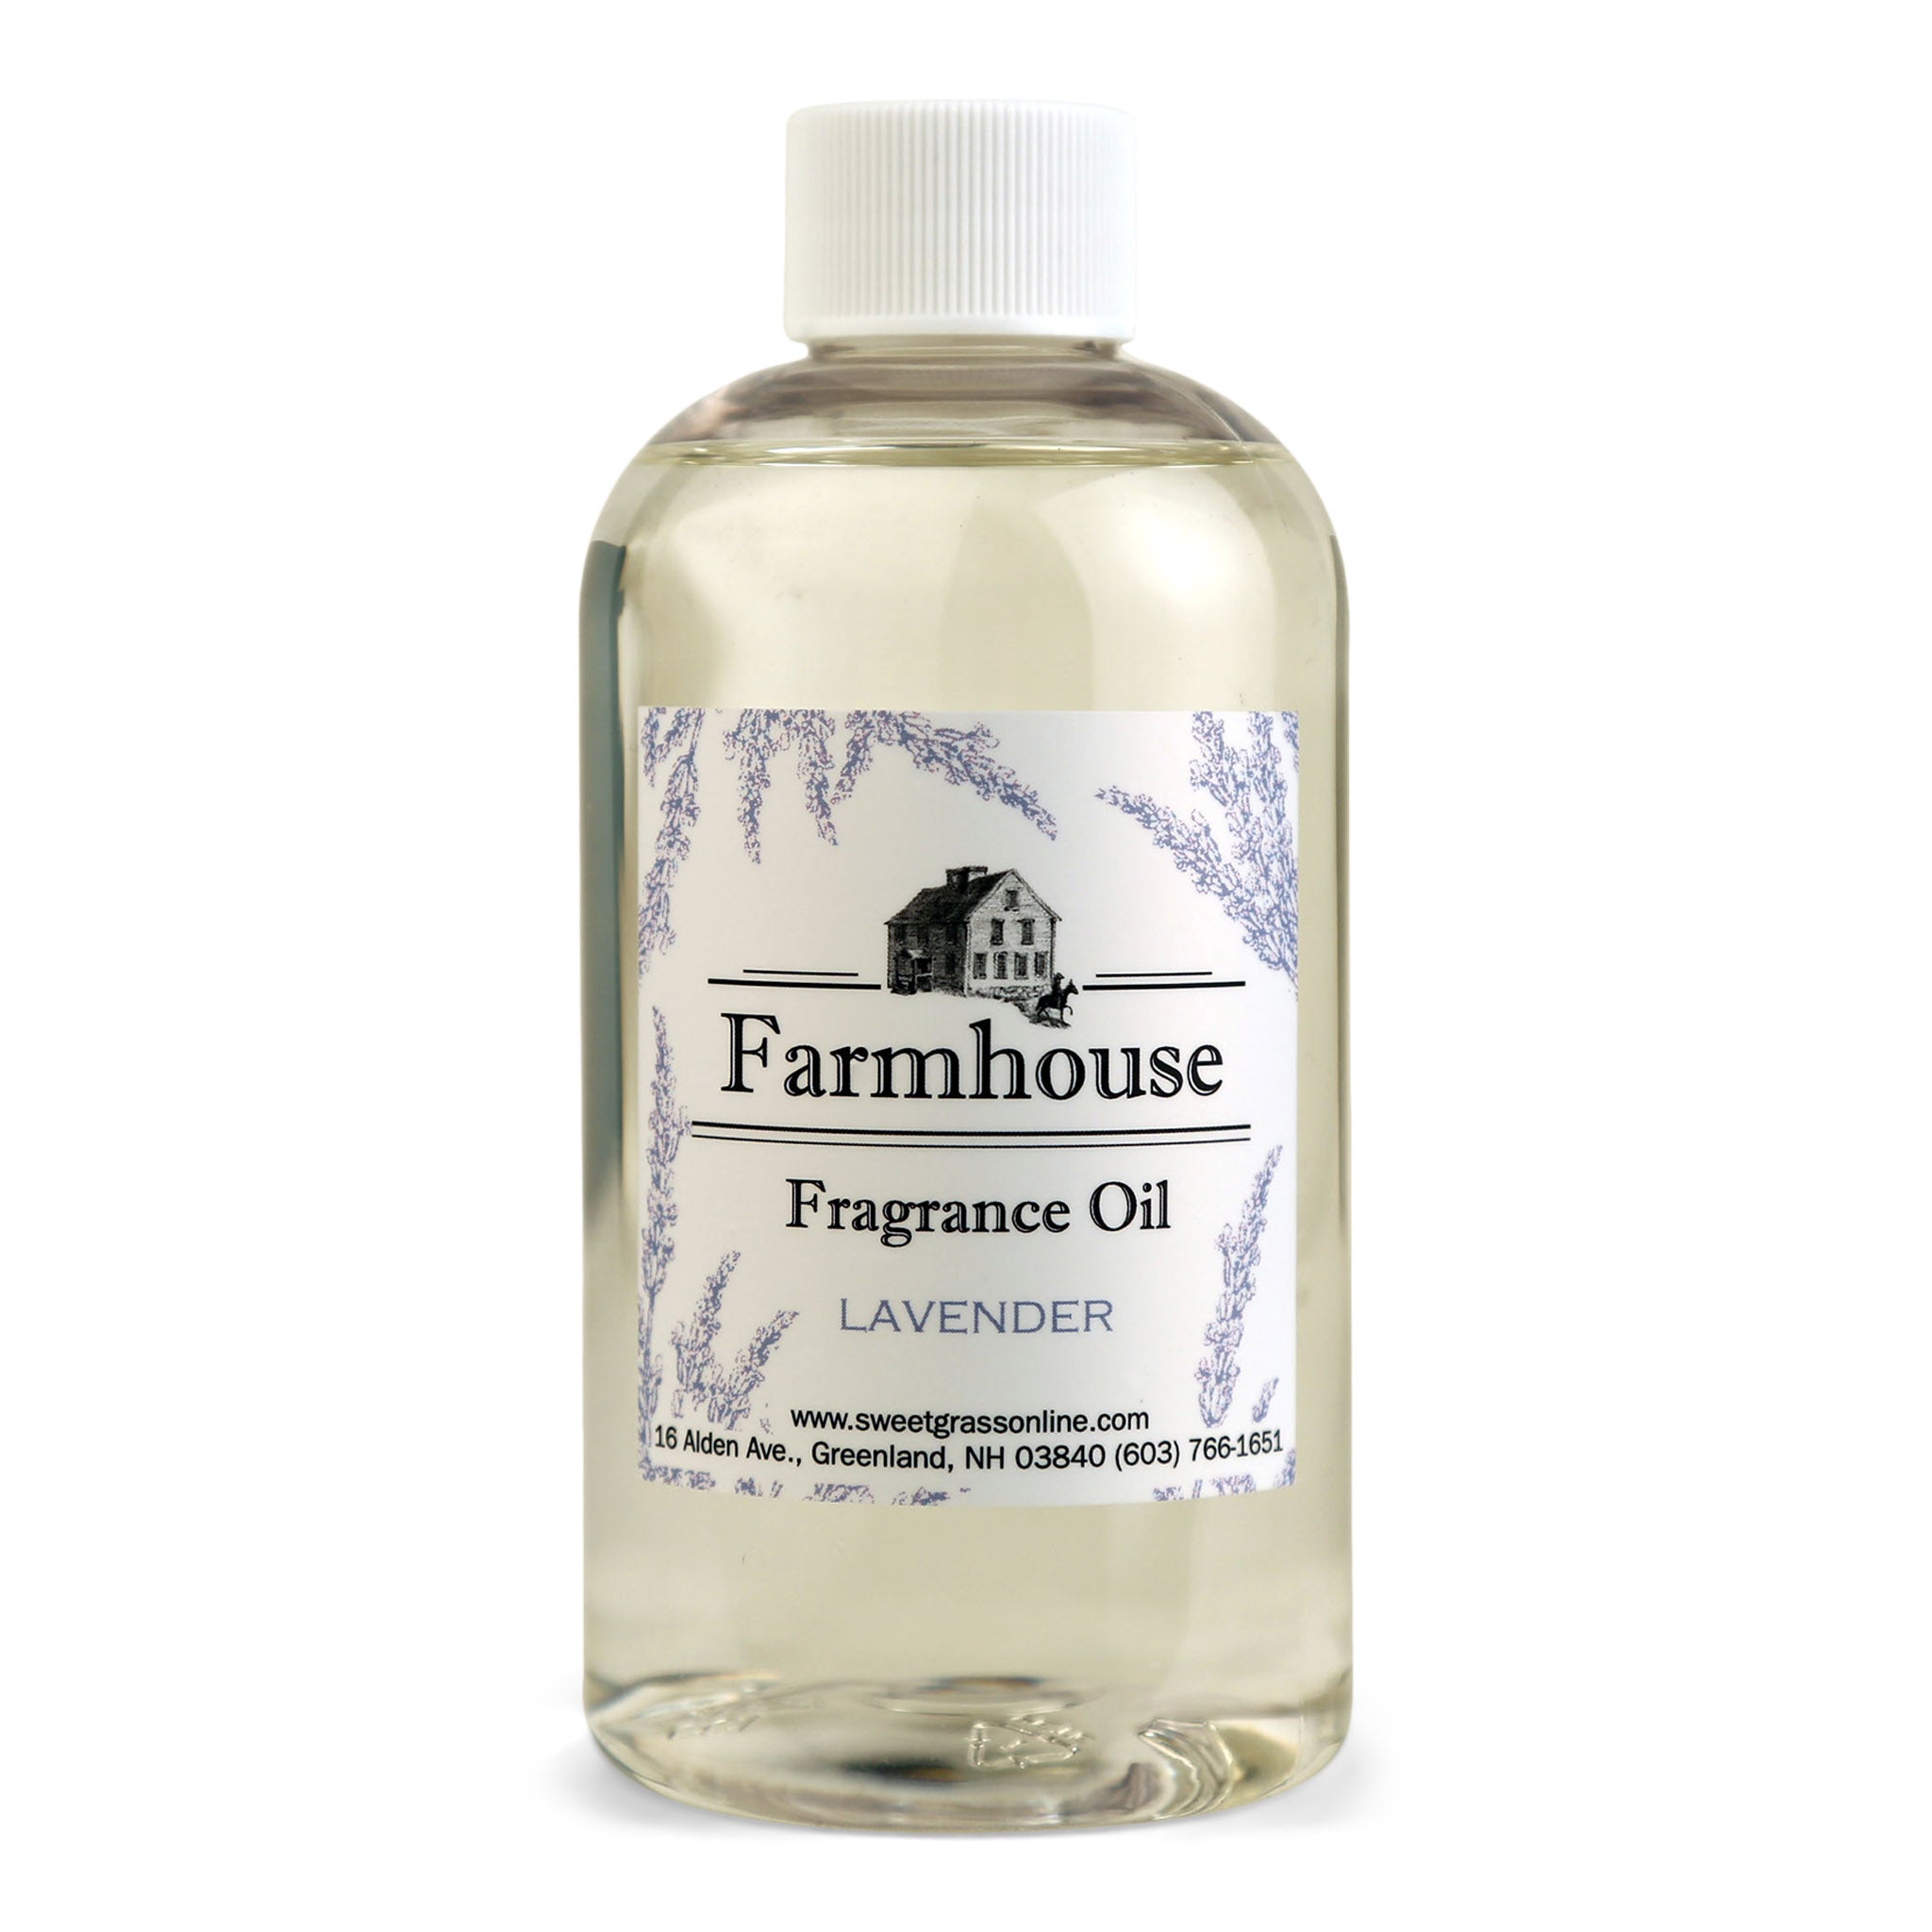 Washed Linen Home Fragrance Diffuser Oil